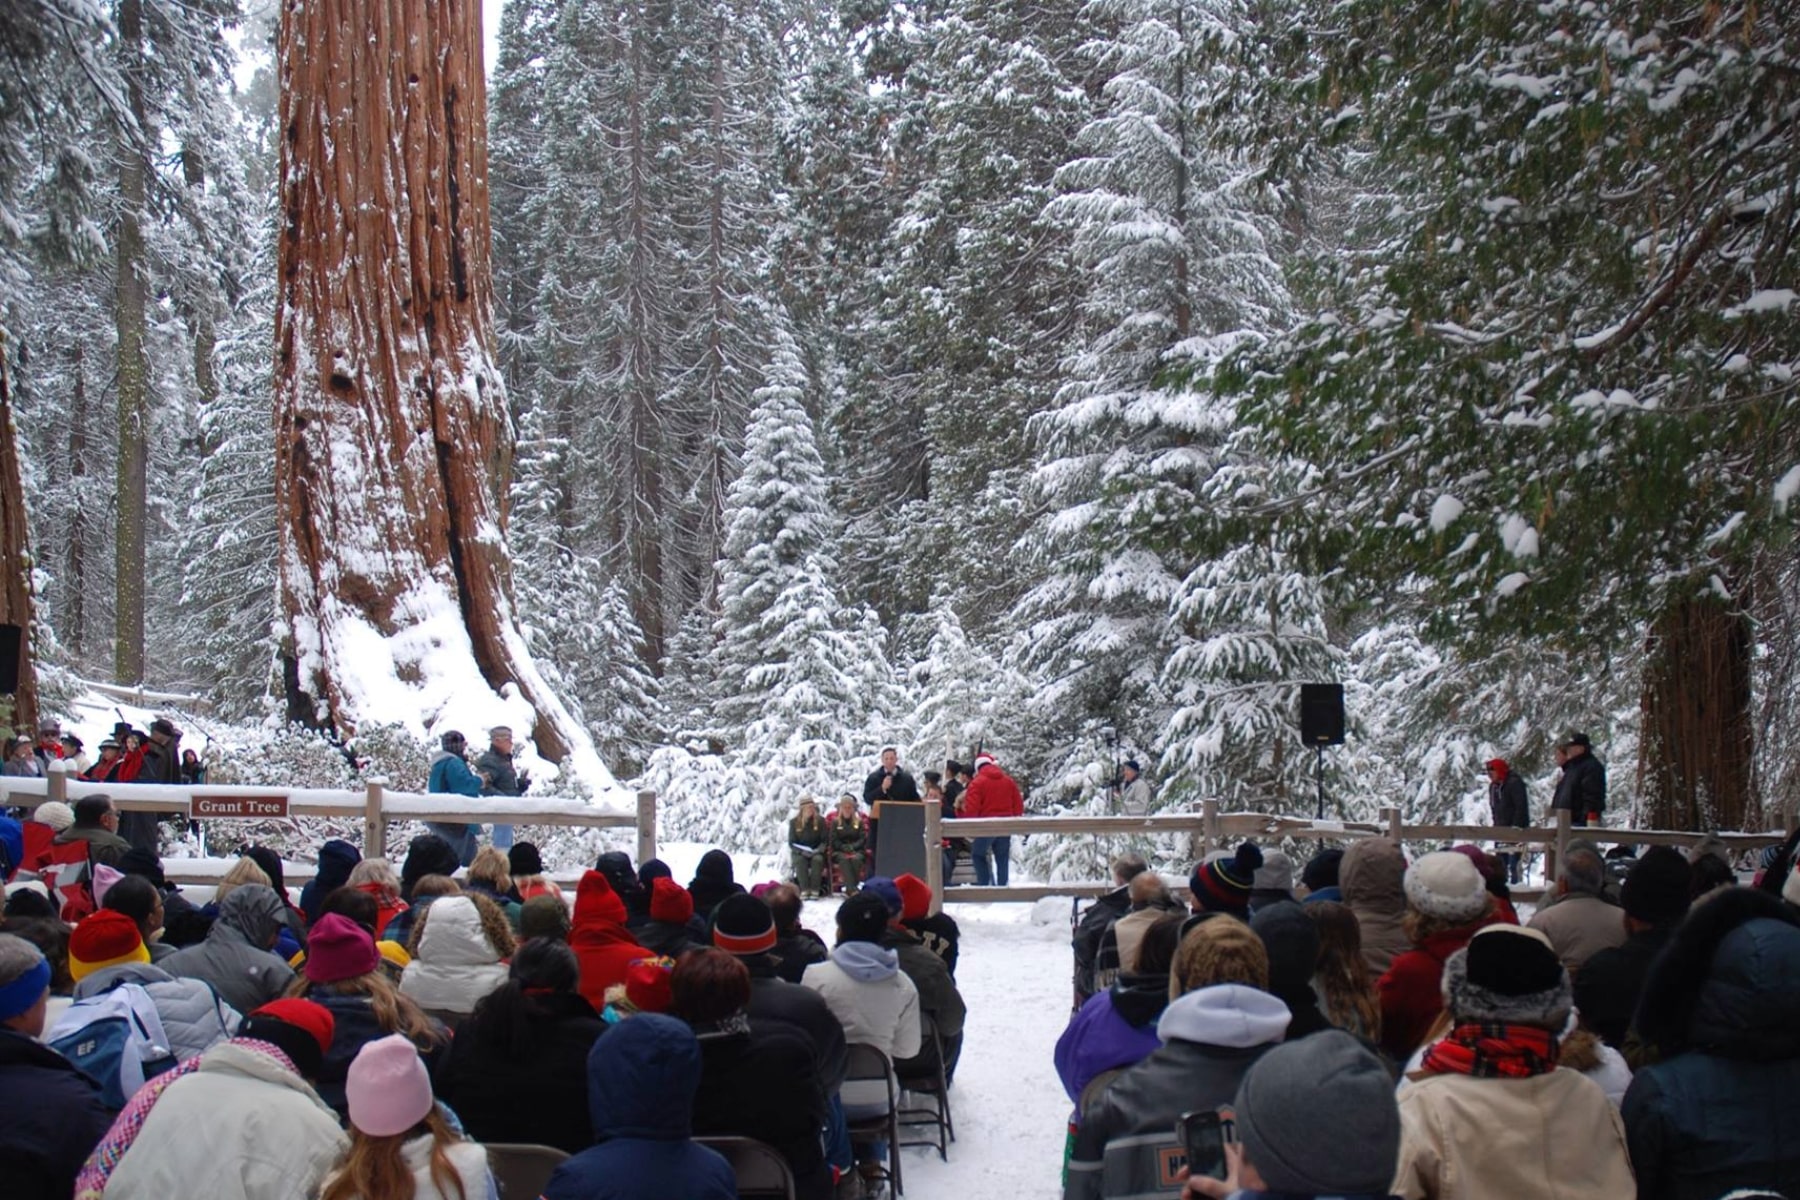 Trek to the Tree event with people seated facing General Grant Tree in Kings Canyon.